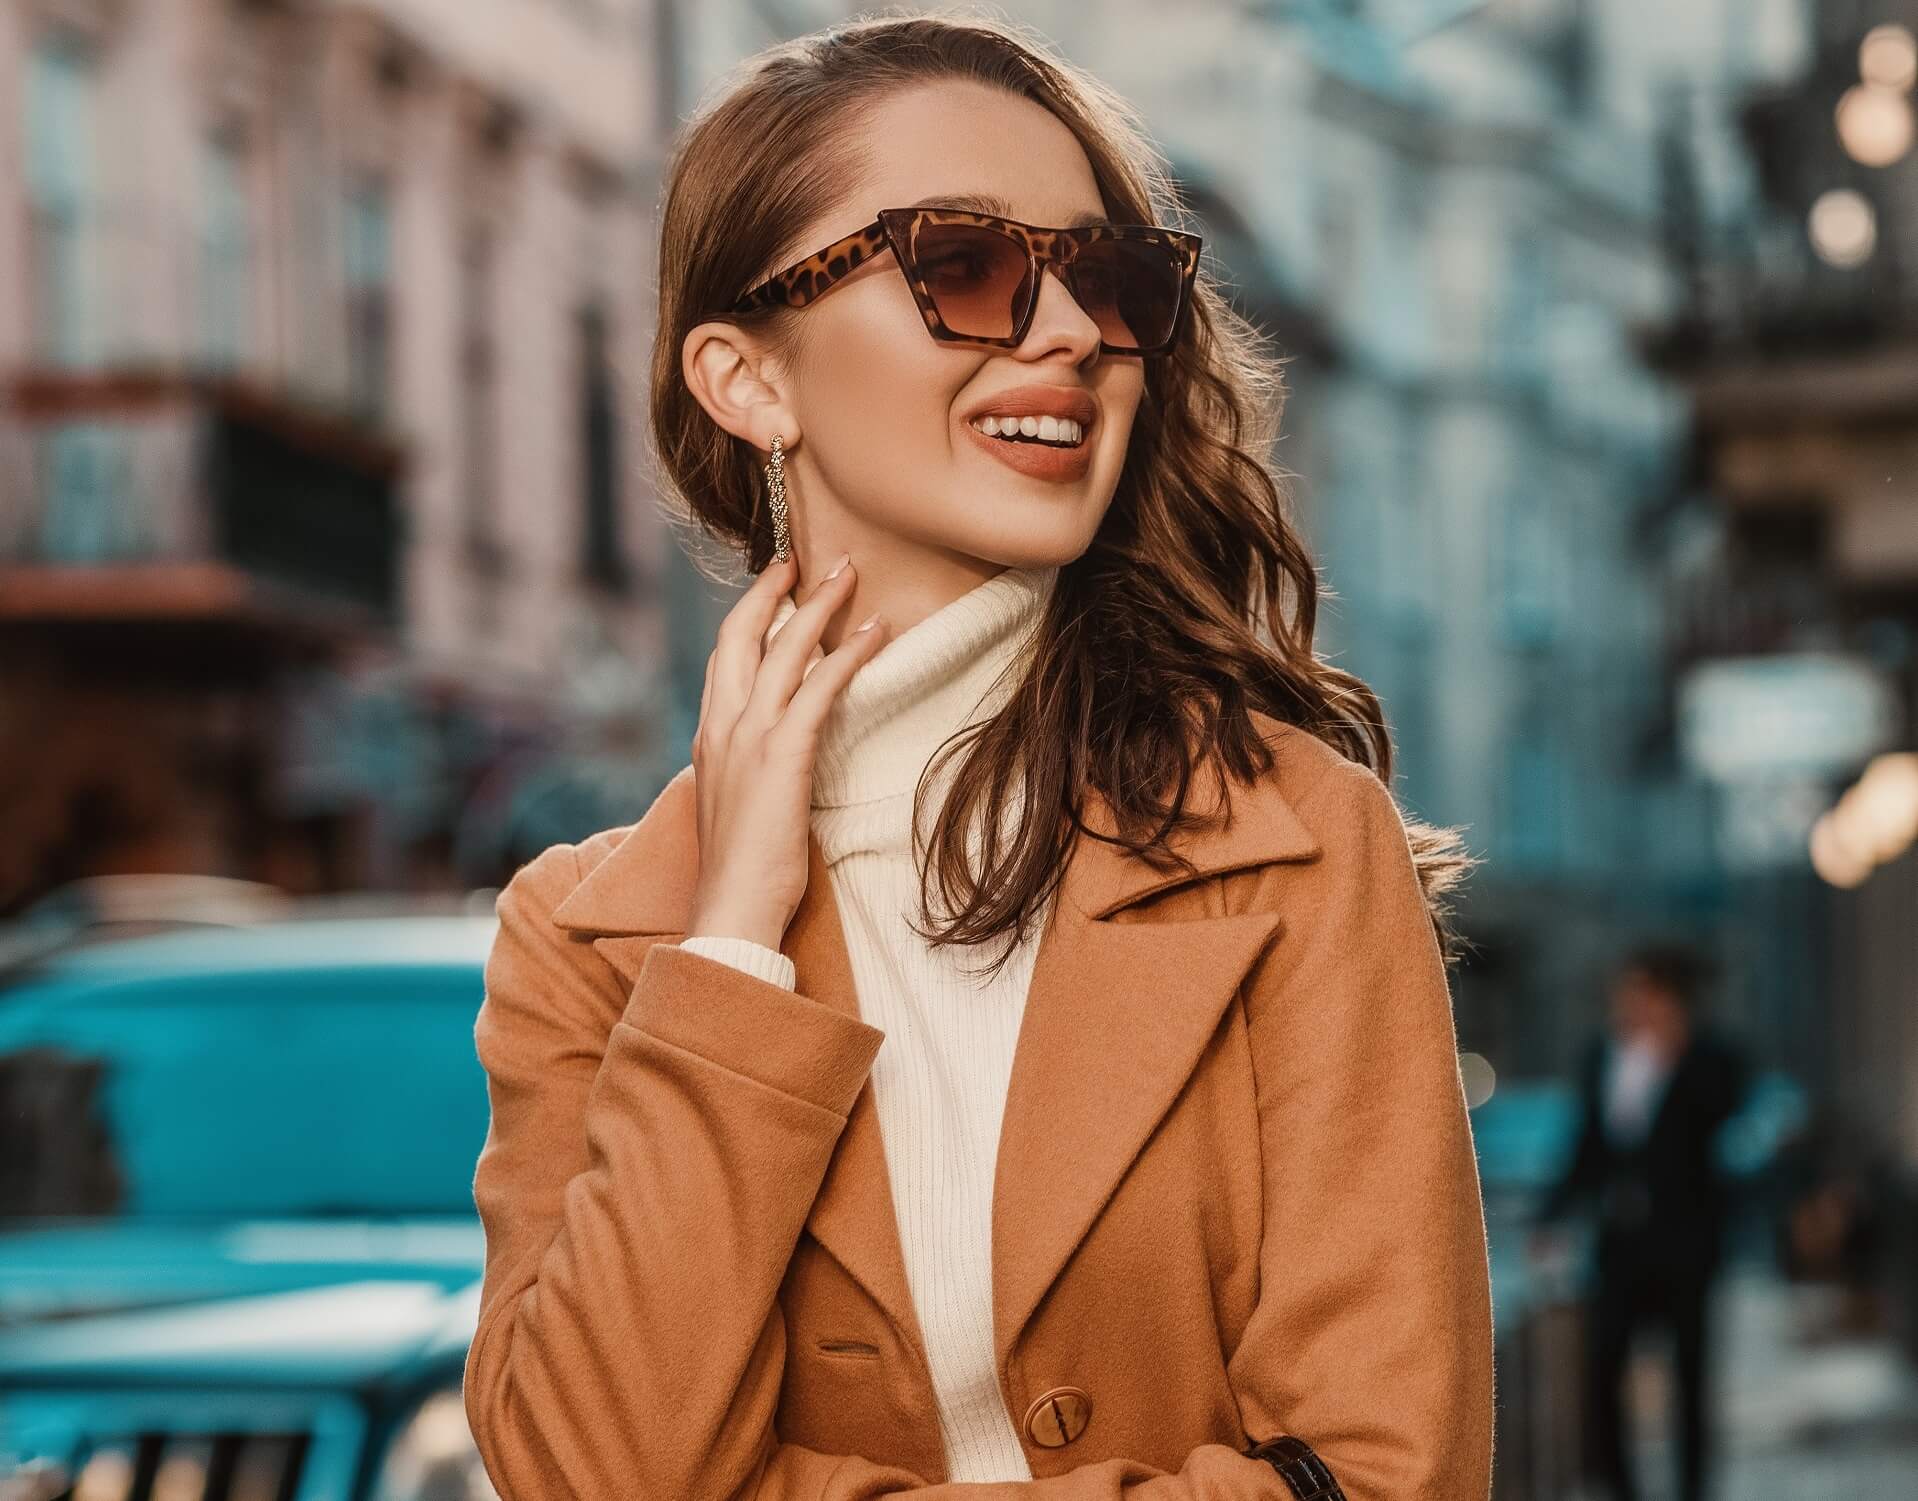 Outdoor portrait of young happy smiling fashionable woman wearing trendy sunglasses, camel color autumn coat, white turtleneck, holding textured reptile handbag, walking in street of European city